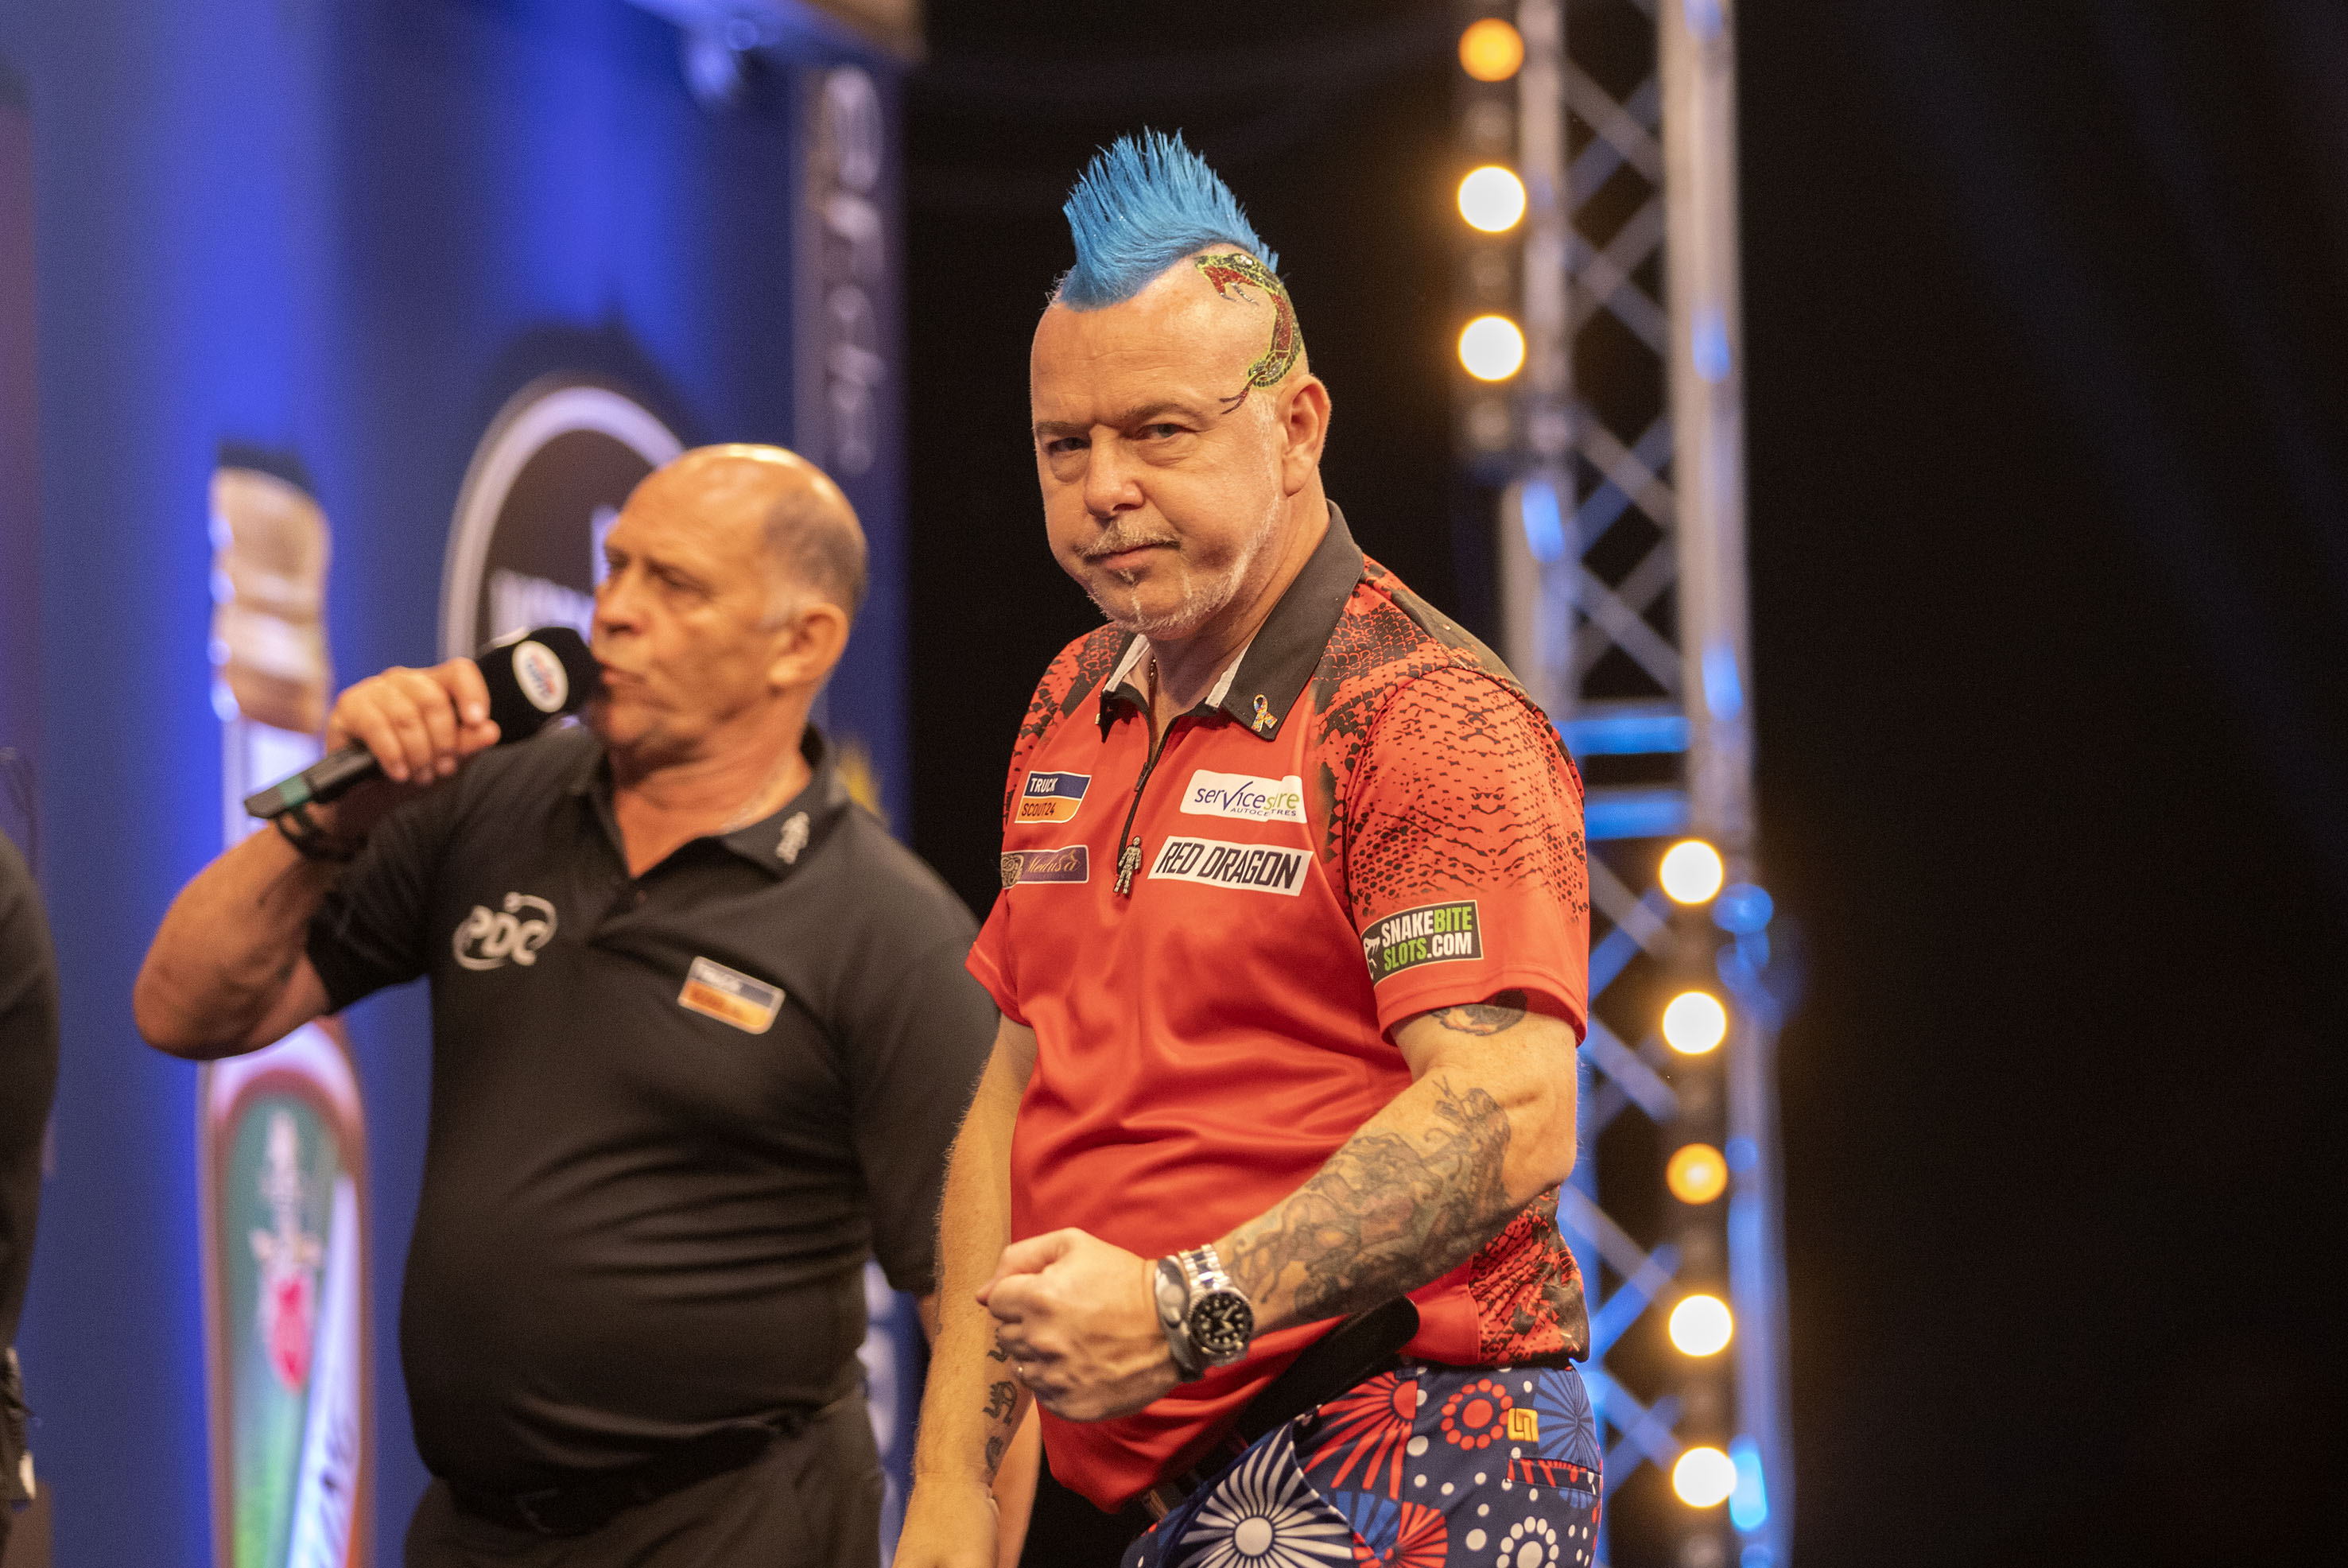 Peter Wright (Kais Bodensieck, PDC)